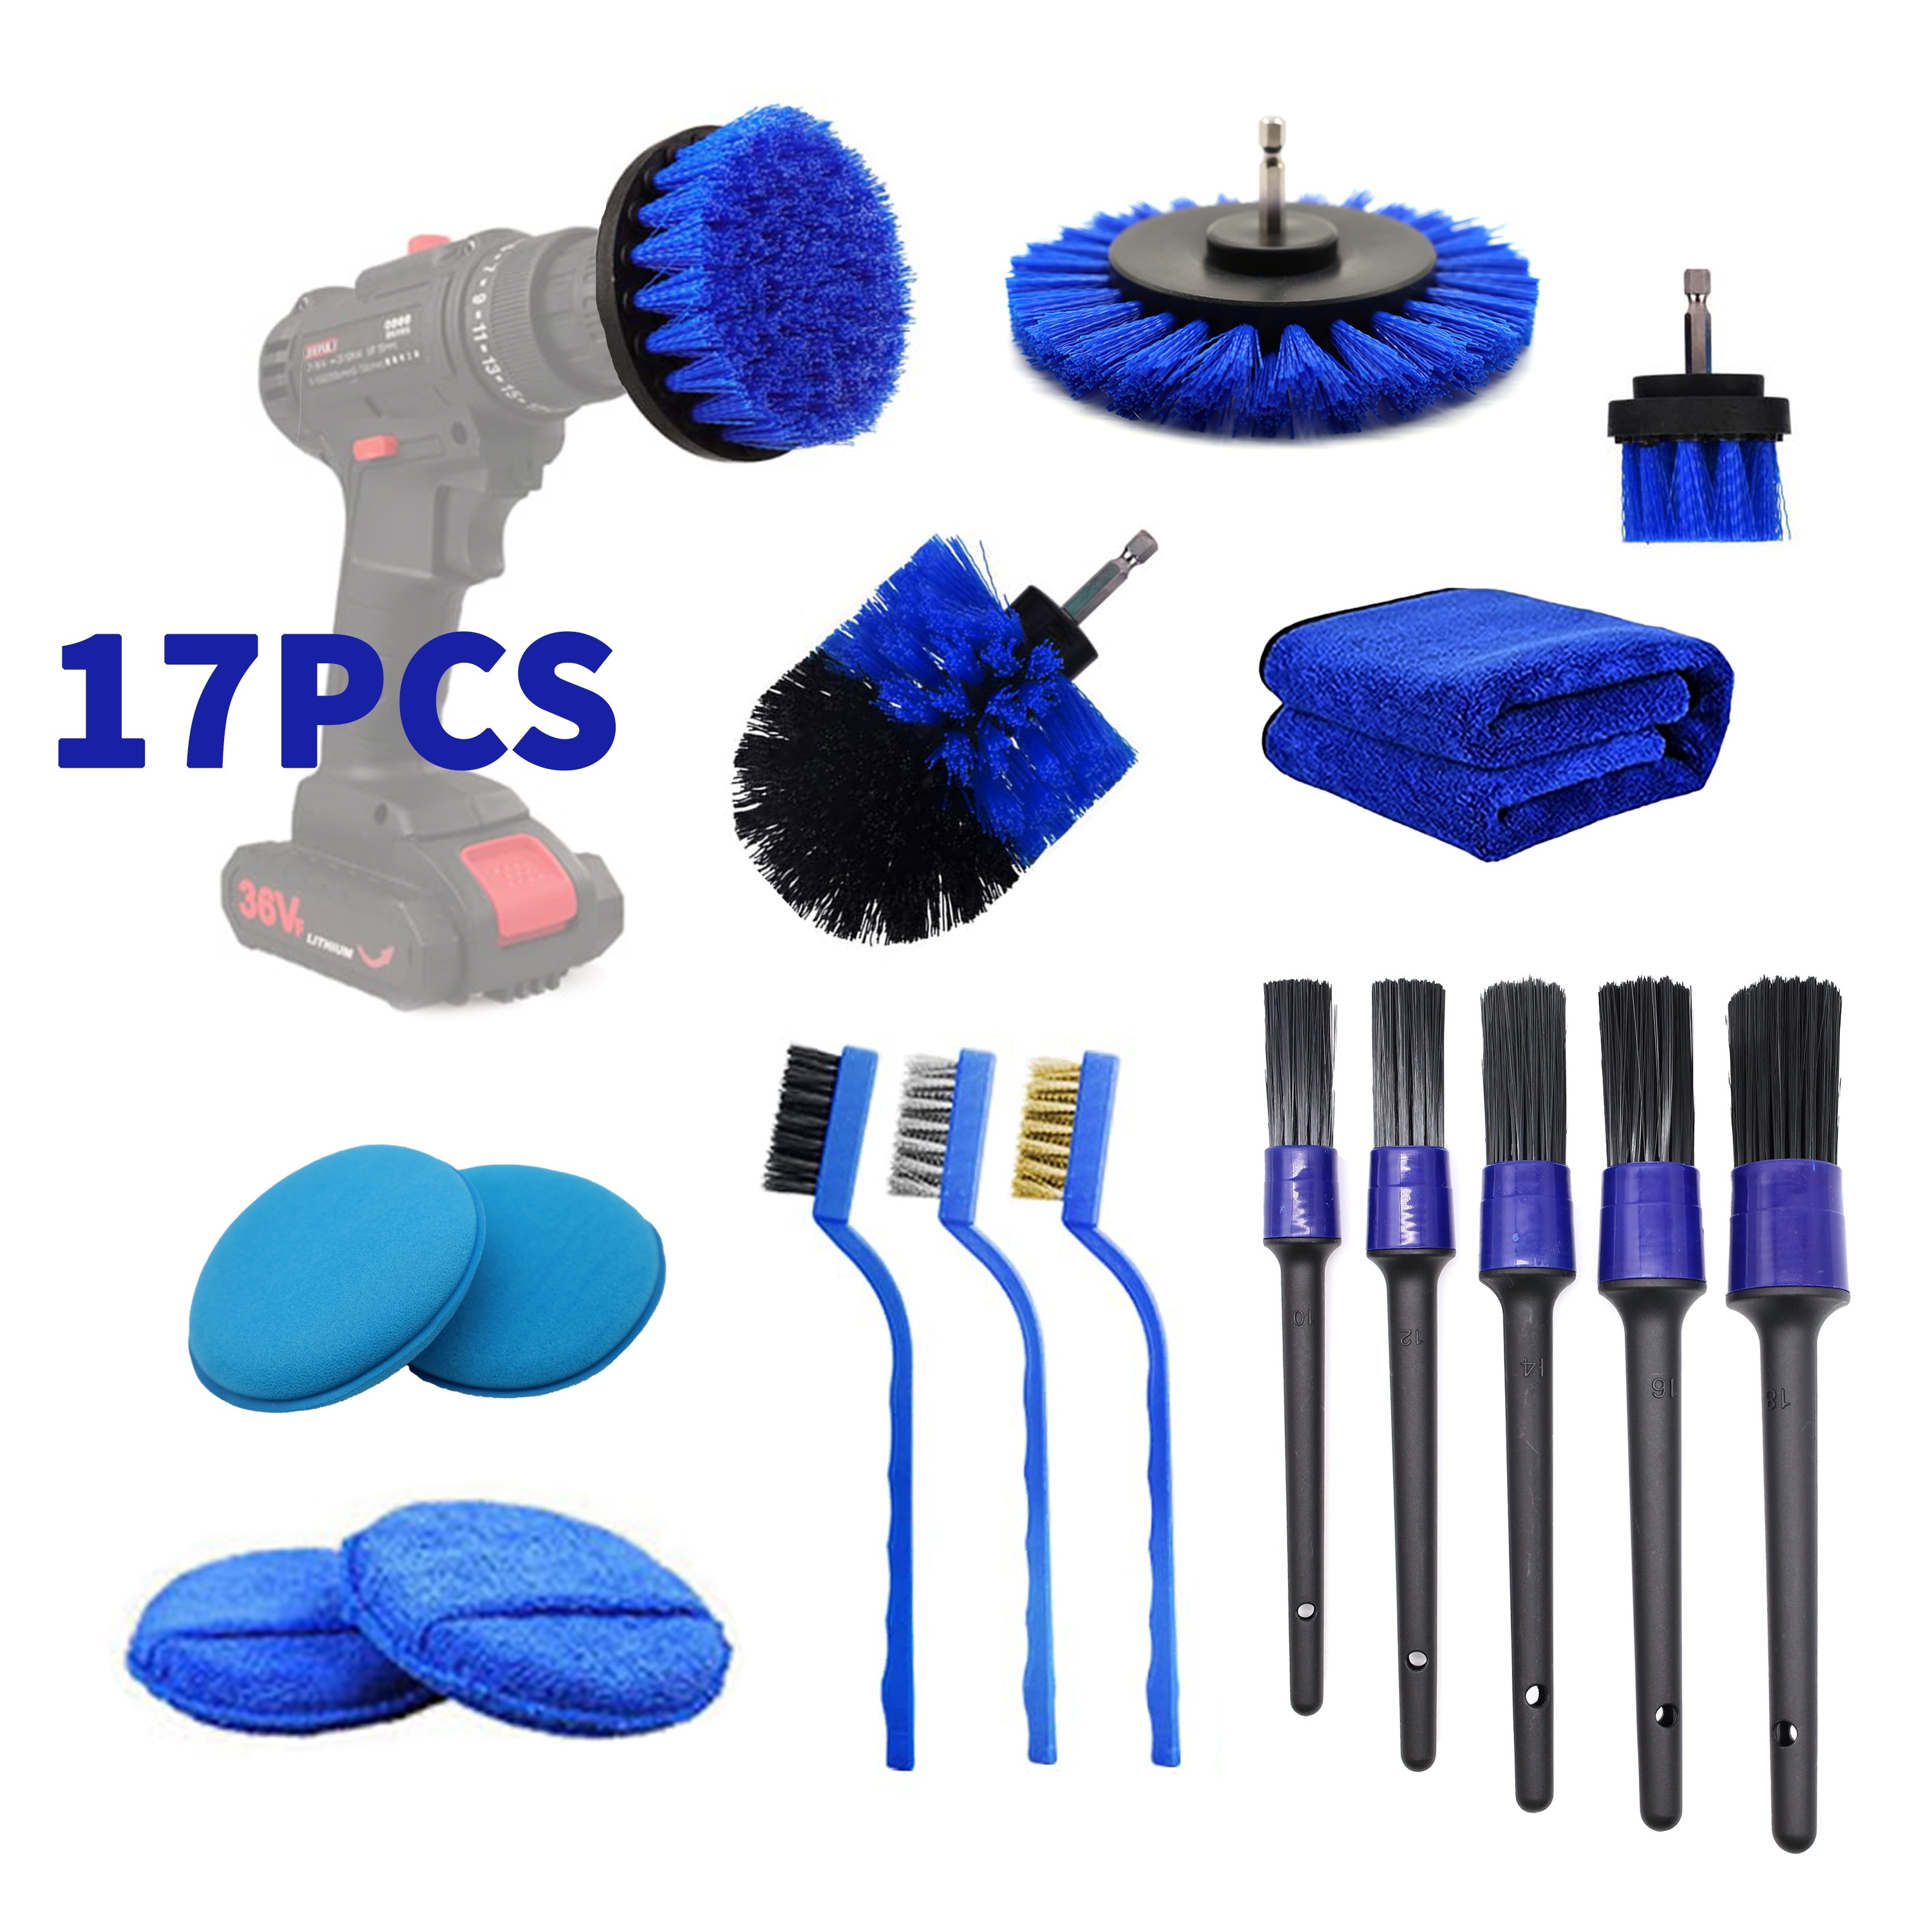 Car Cleaning Brush, Car Wash Tool Set, Car Detailing Brush Set, Drill Brush  Attachment Set, For Car Interior, Exterior, Wheel Cleaning, Grinding,  Polishing, To Meet Various Car Cleaning And Daily Cleaning Needs